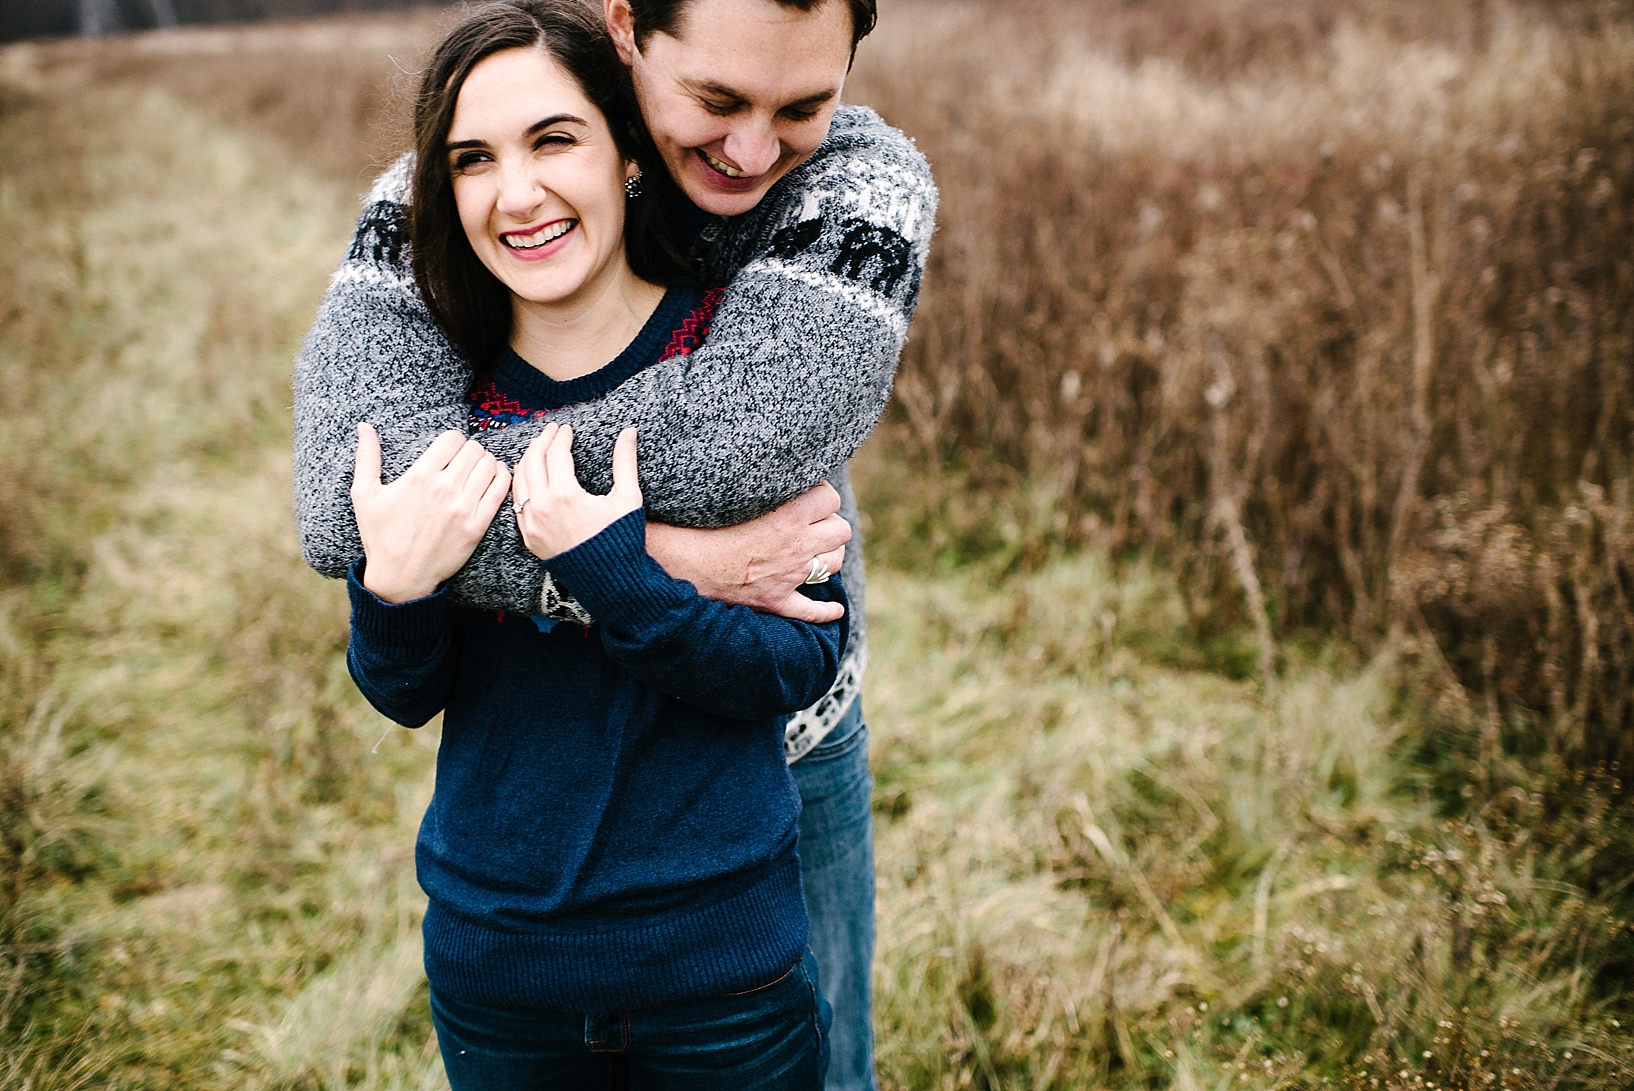 guy in grey sweater standing behind girl in blue sweater hugging and laughing